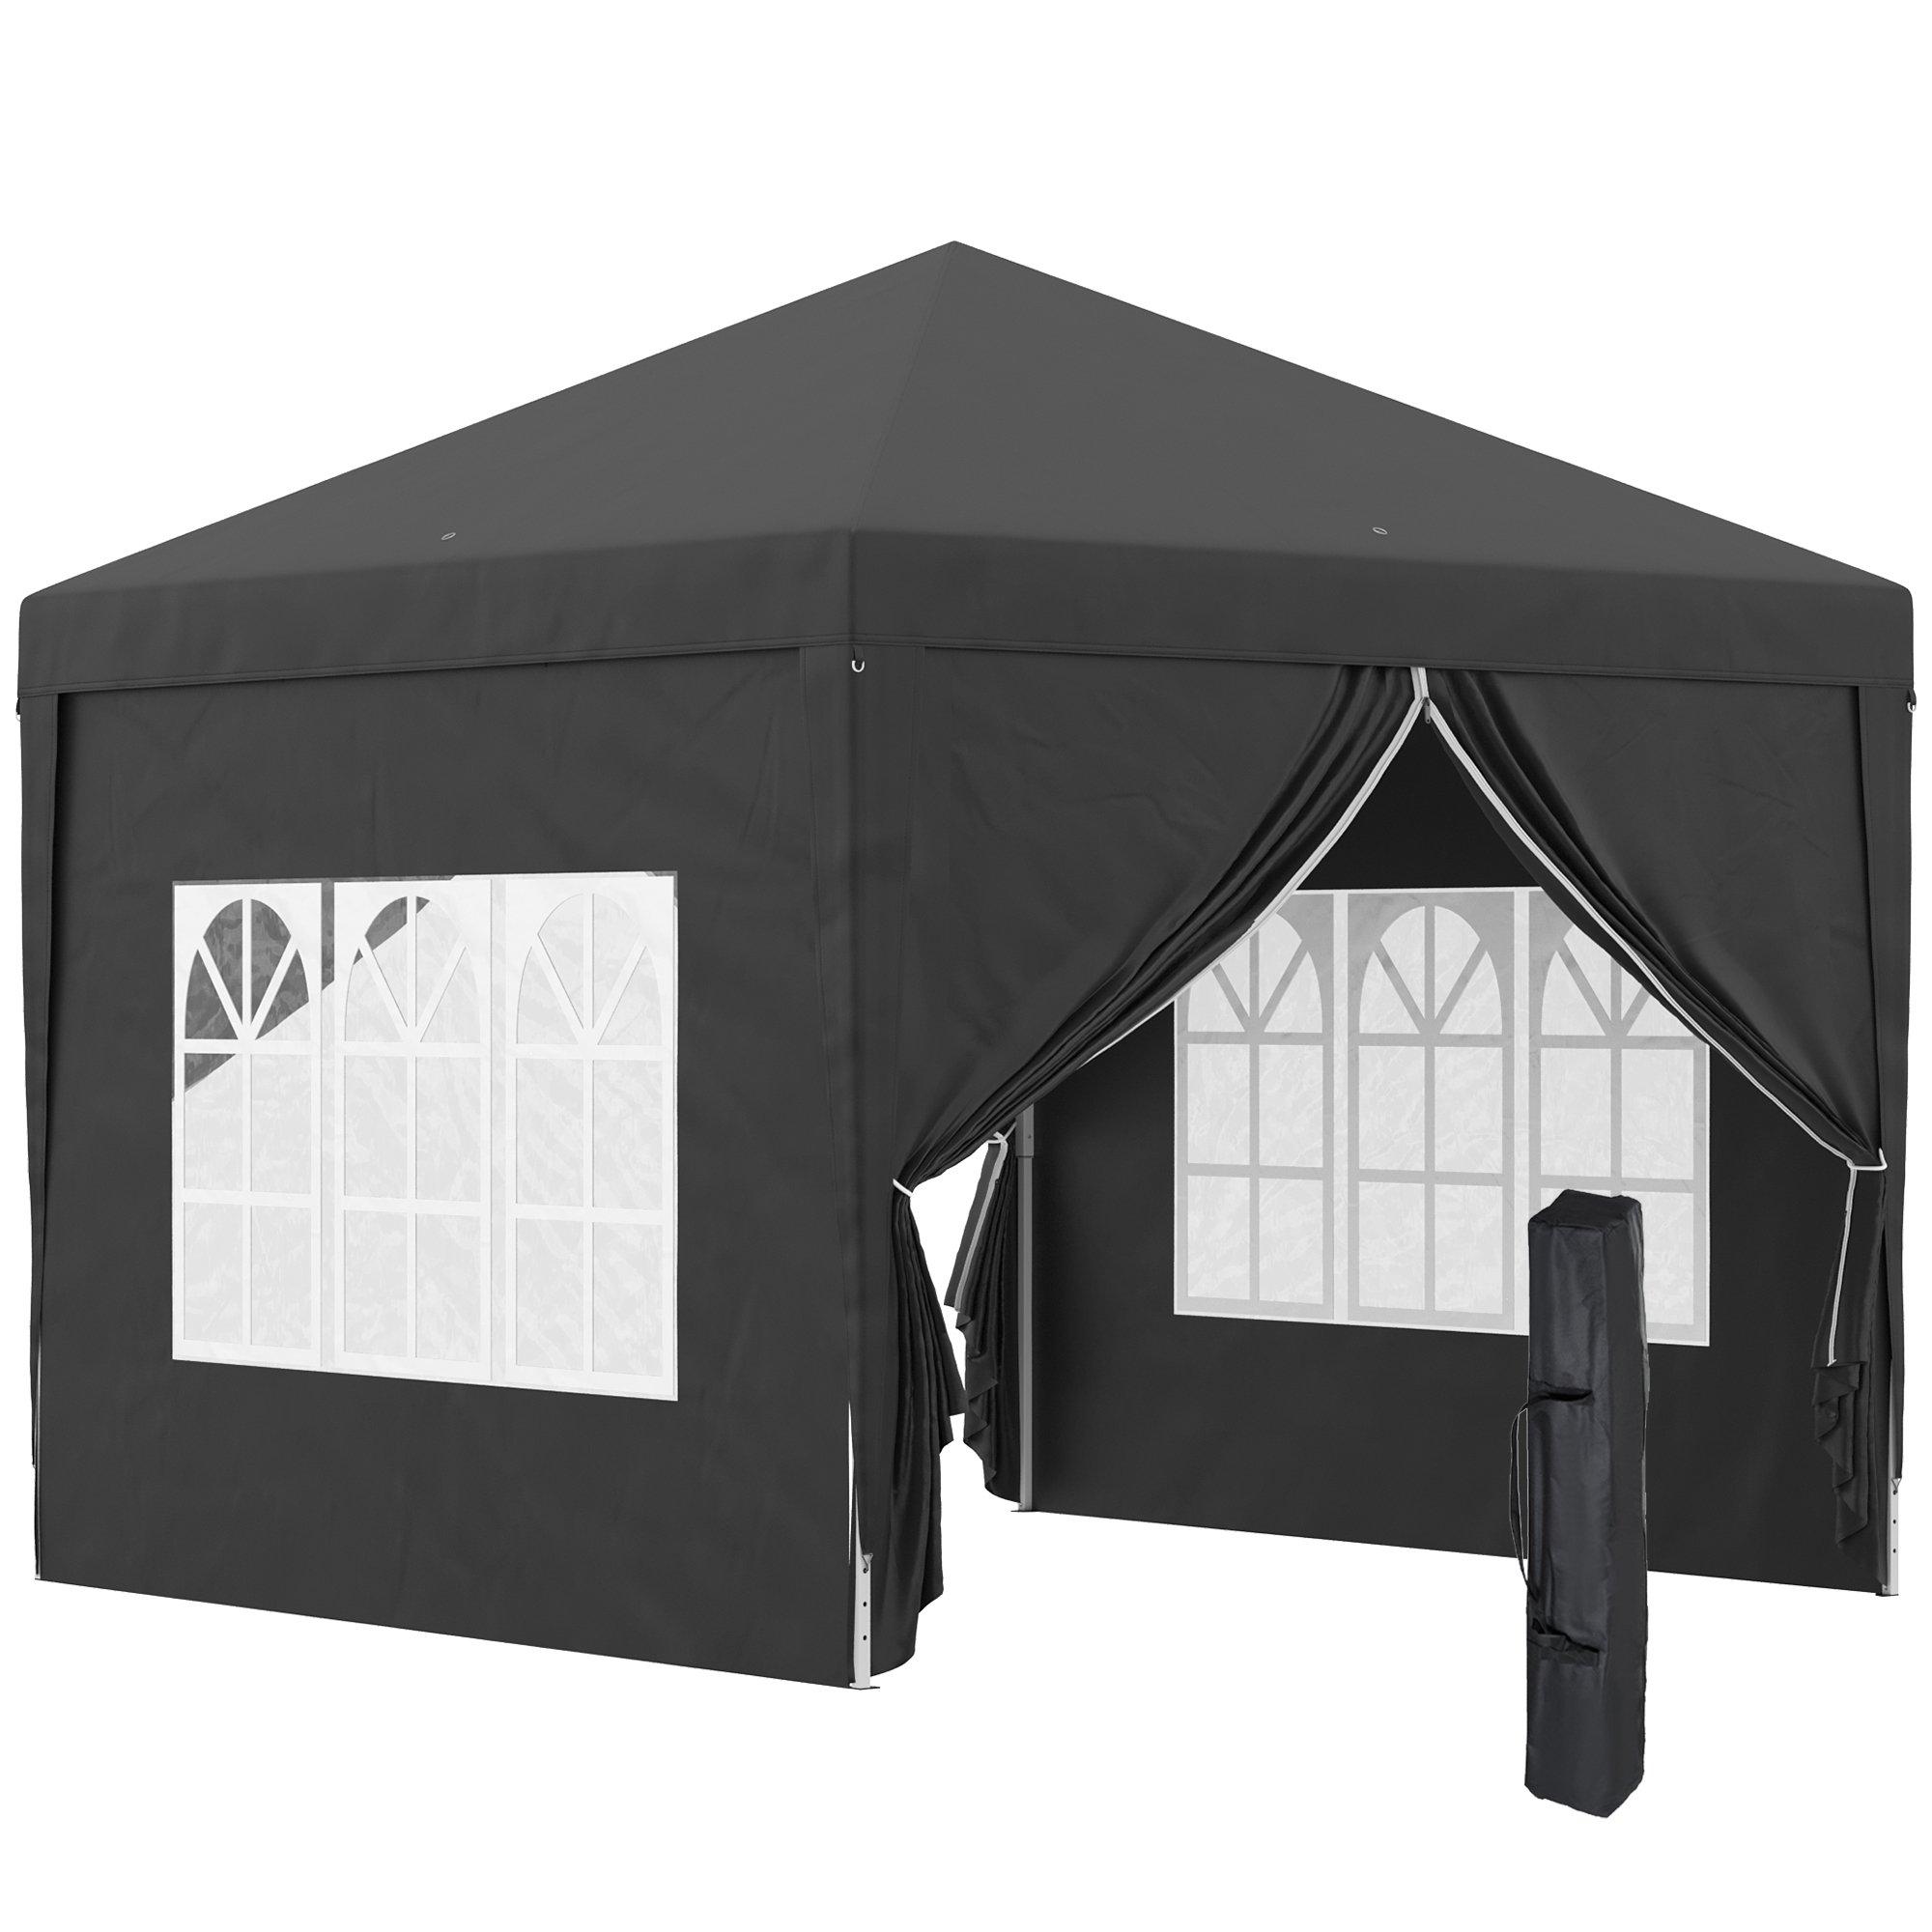 3mx3m Pop Up Gazebo Party Tent Canopy Marquee with Storage Bag